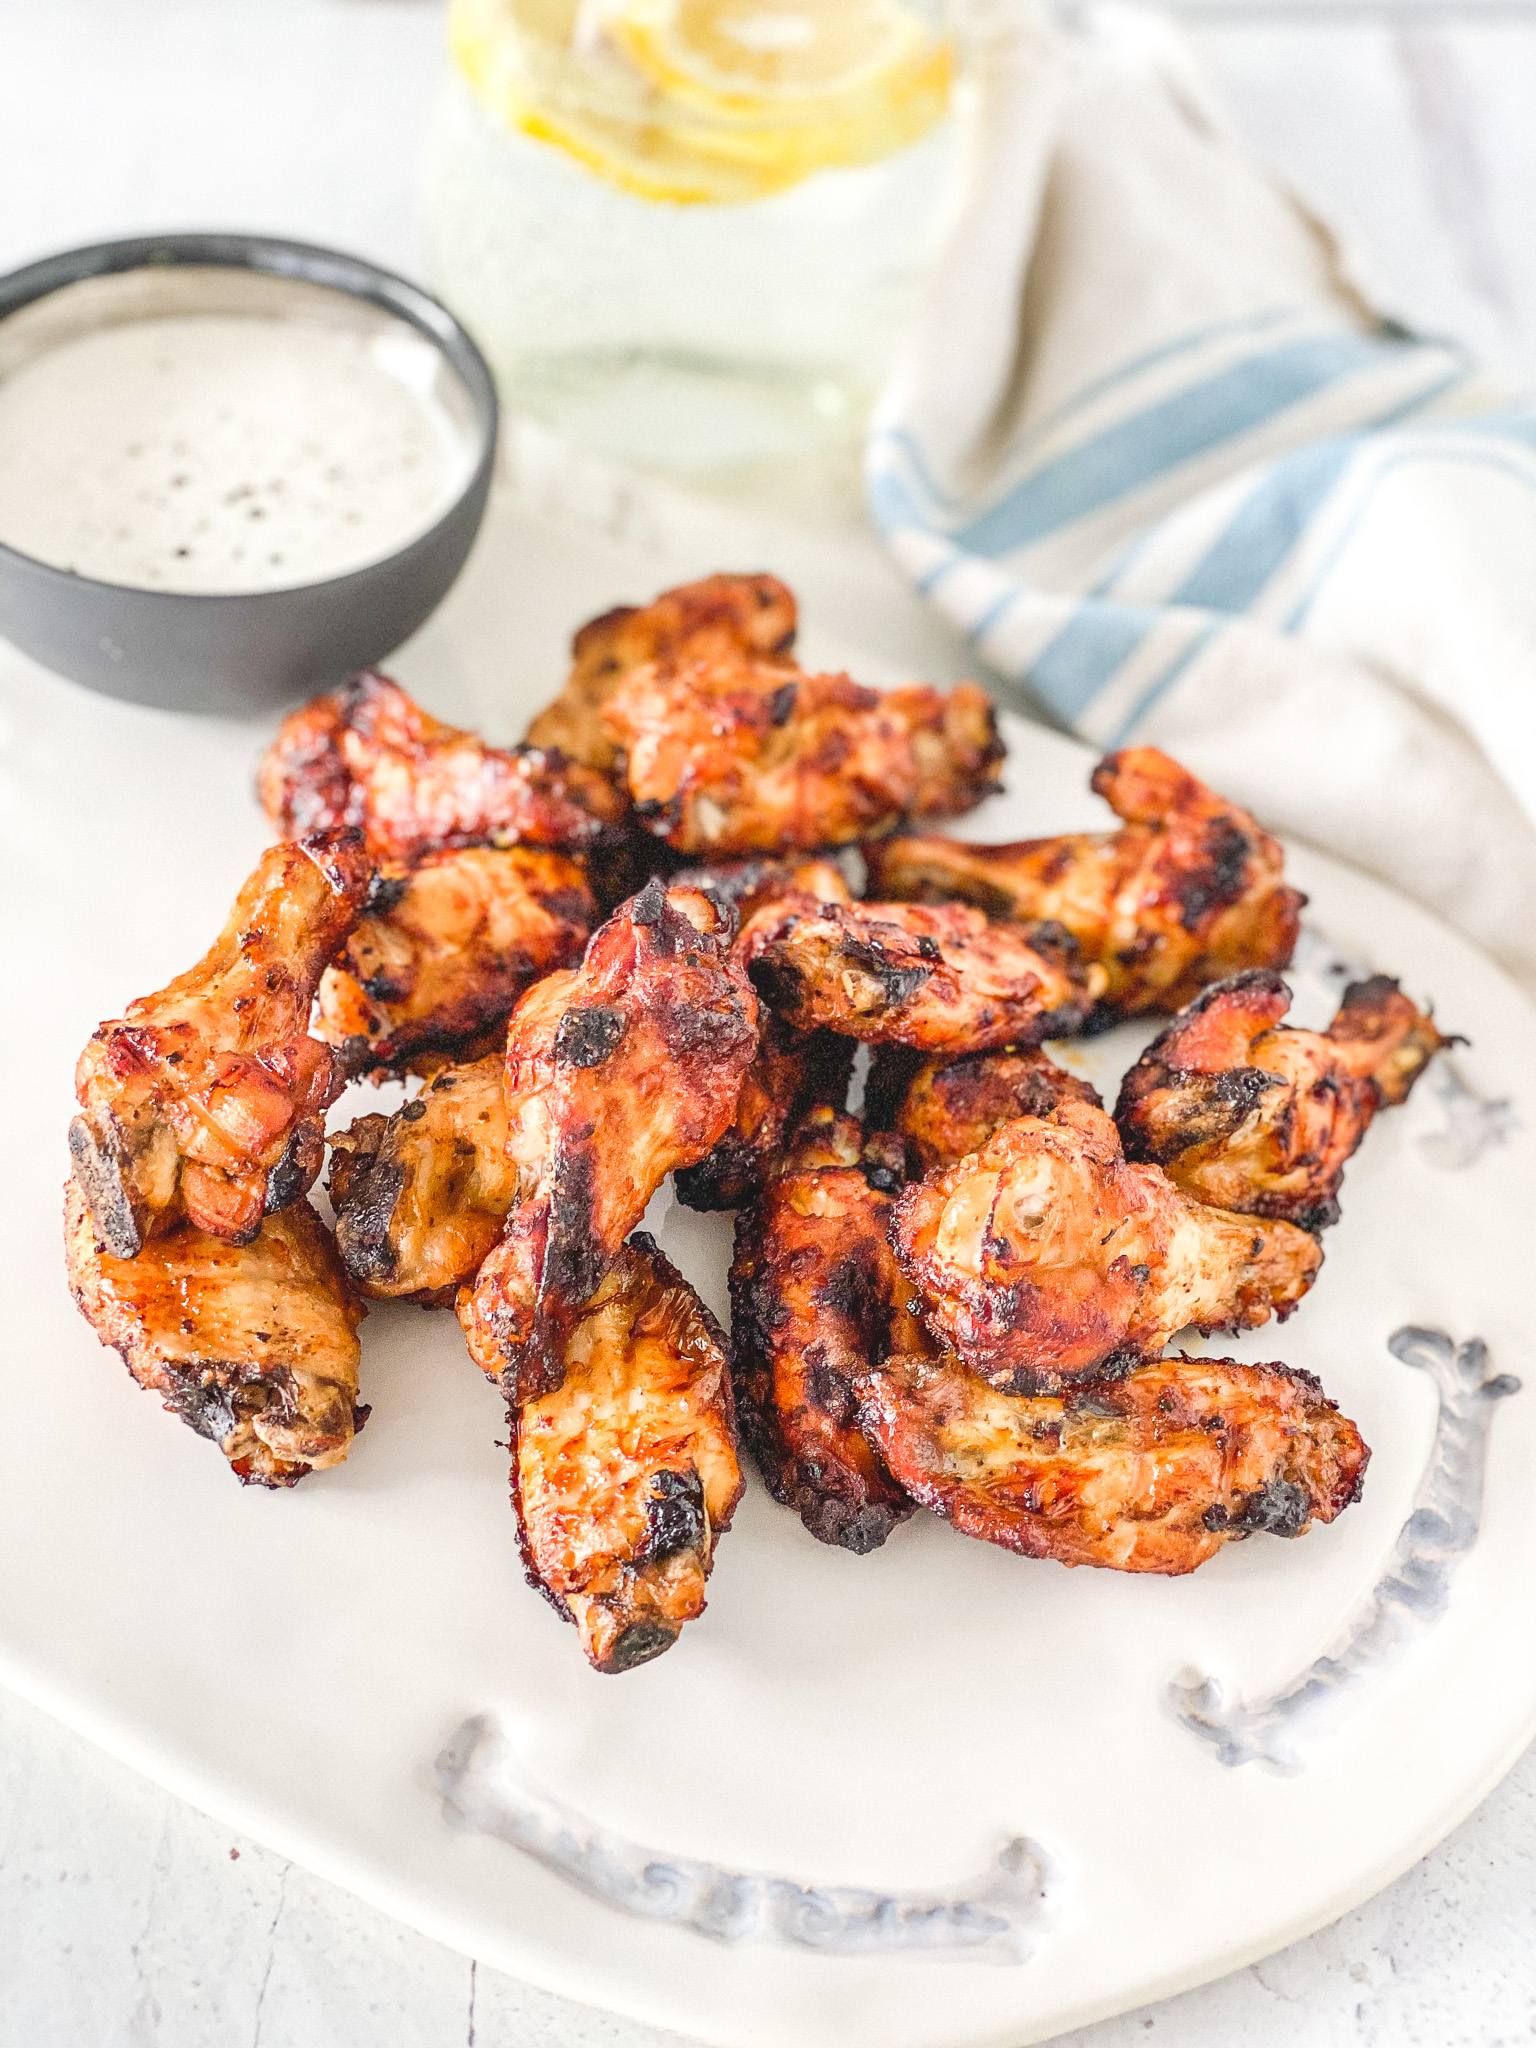 Chipotle Chicken Wings with Bangin' Sauce | Mary Ann Life Blog